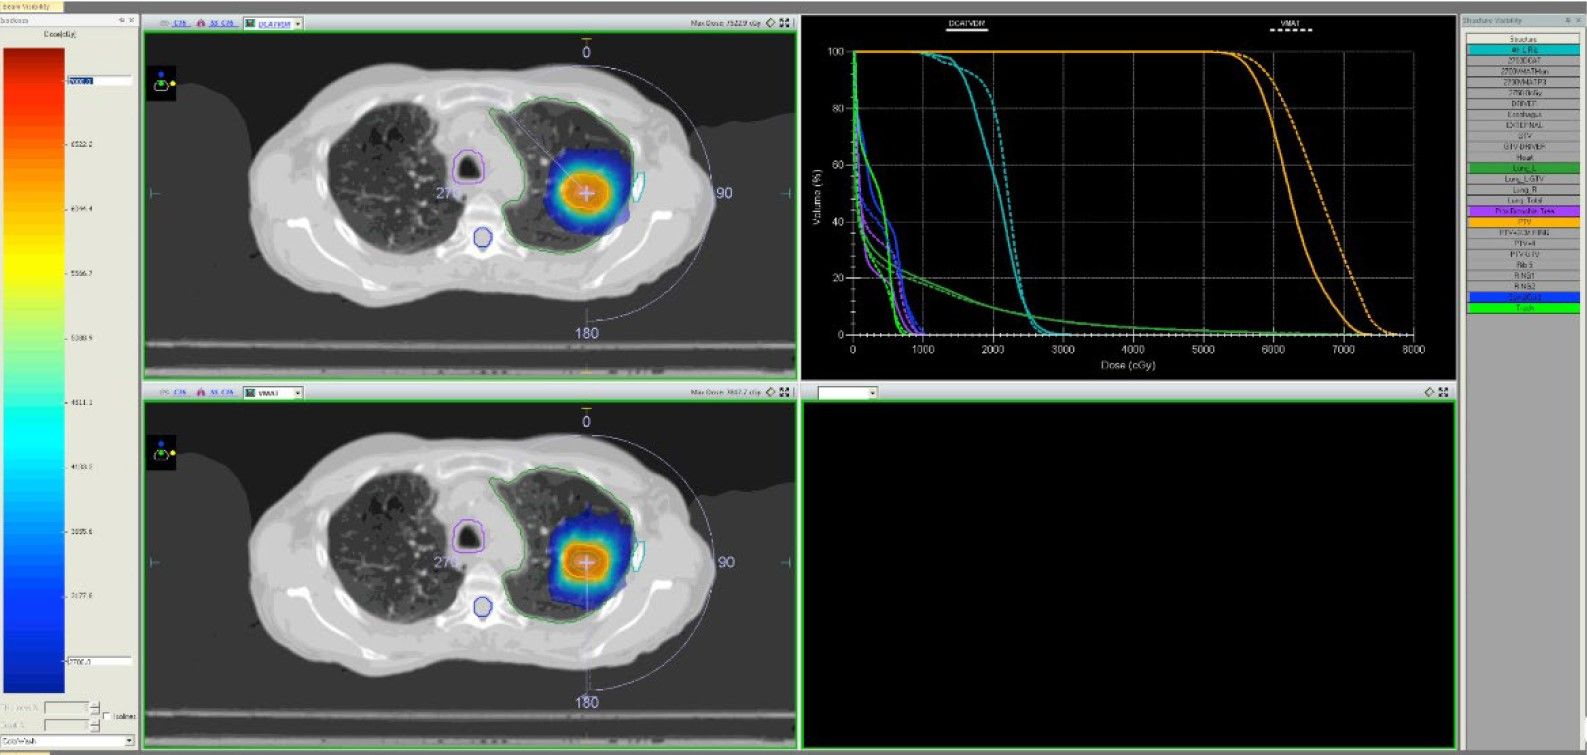 Comparison of isodose distributions seen for left and right breast with